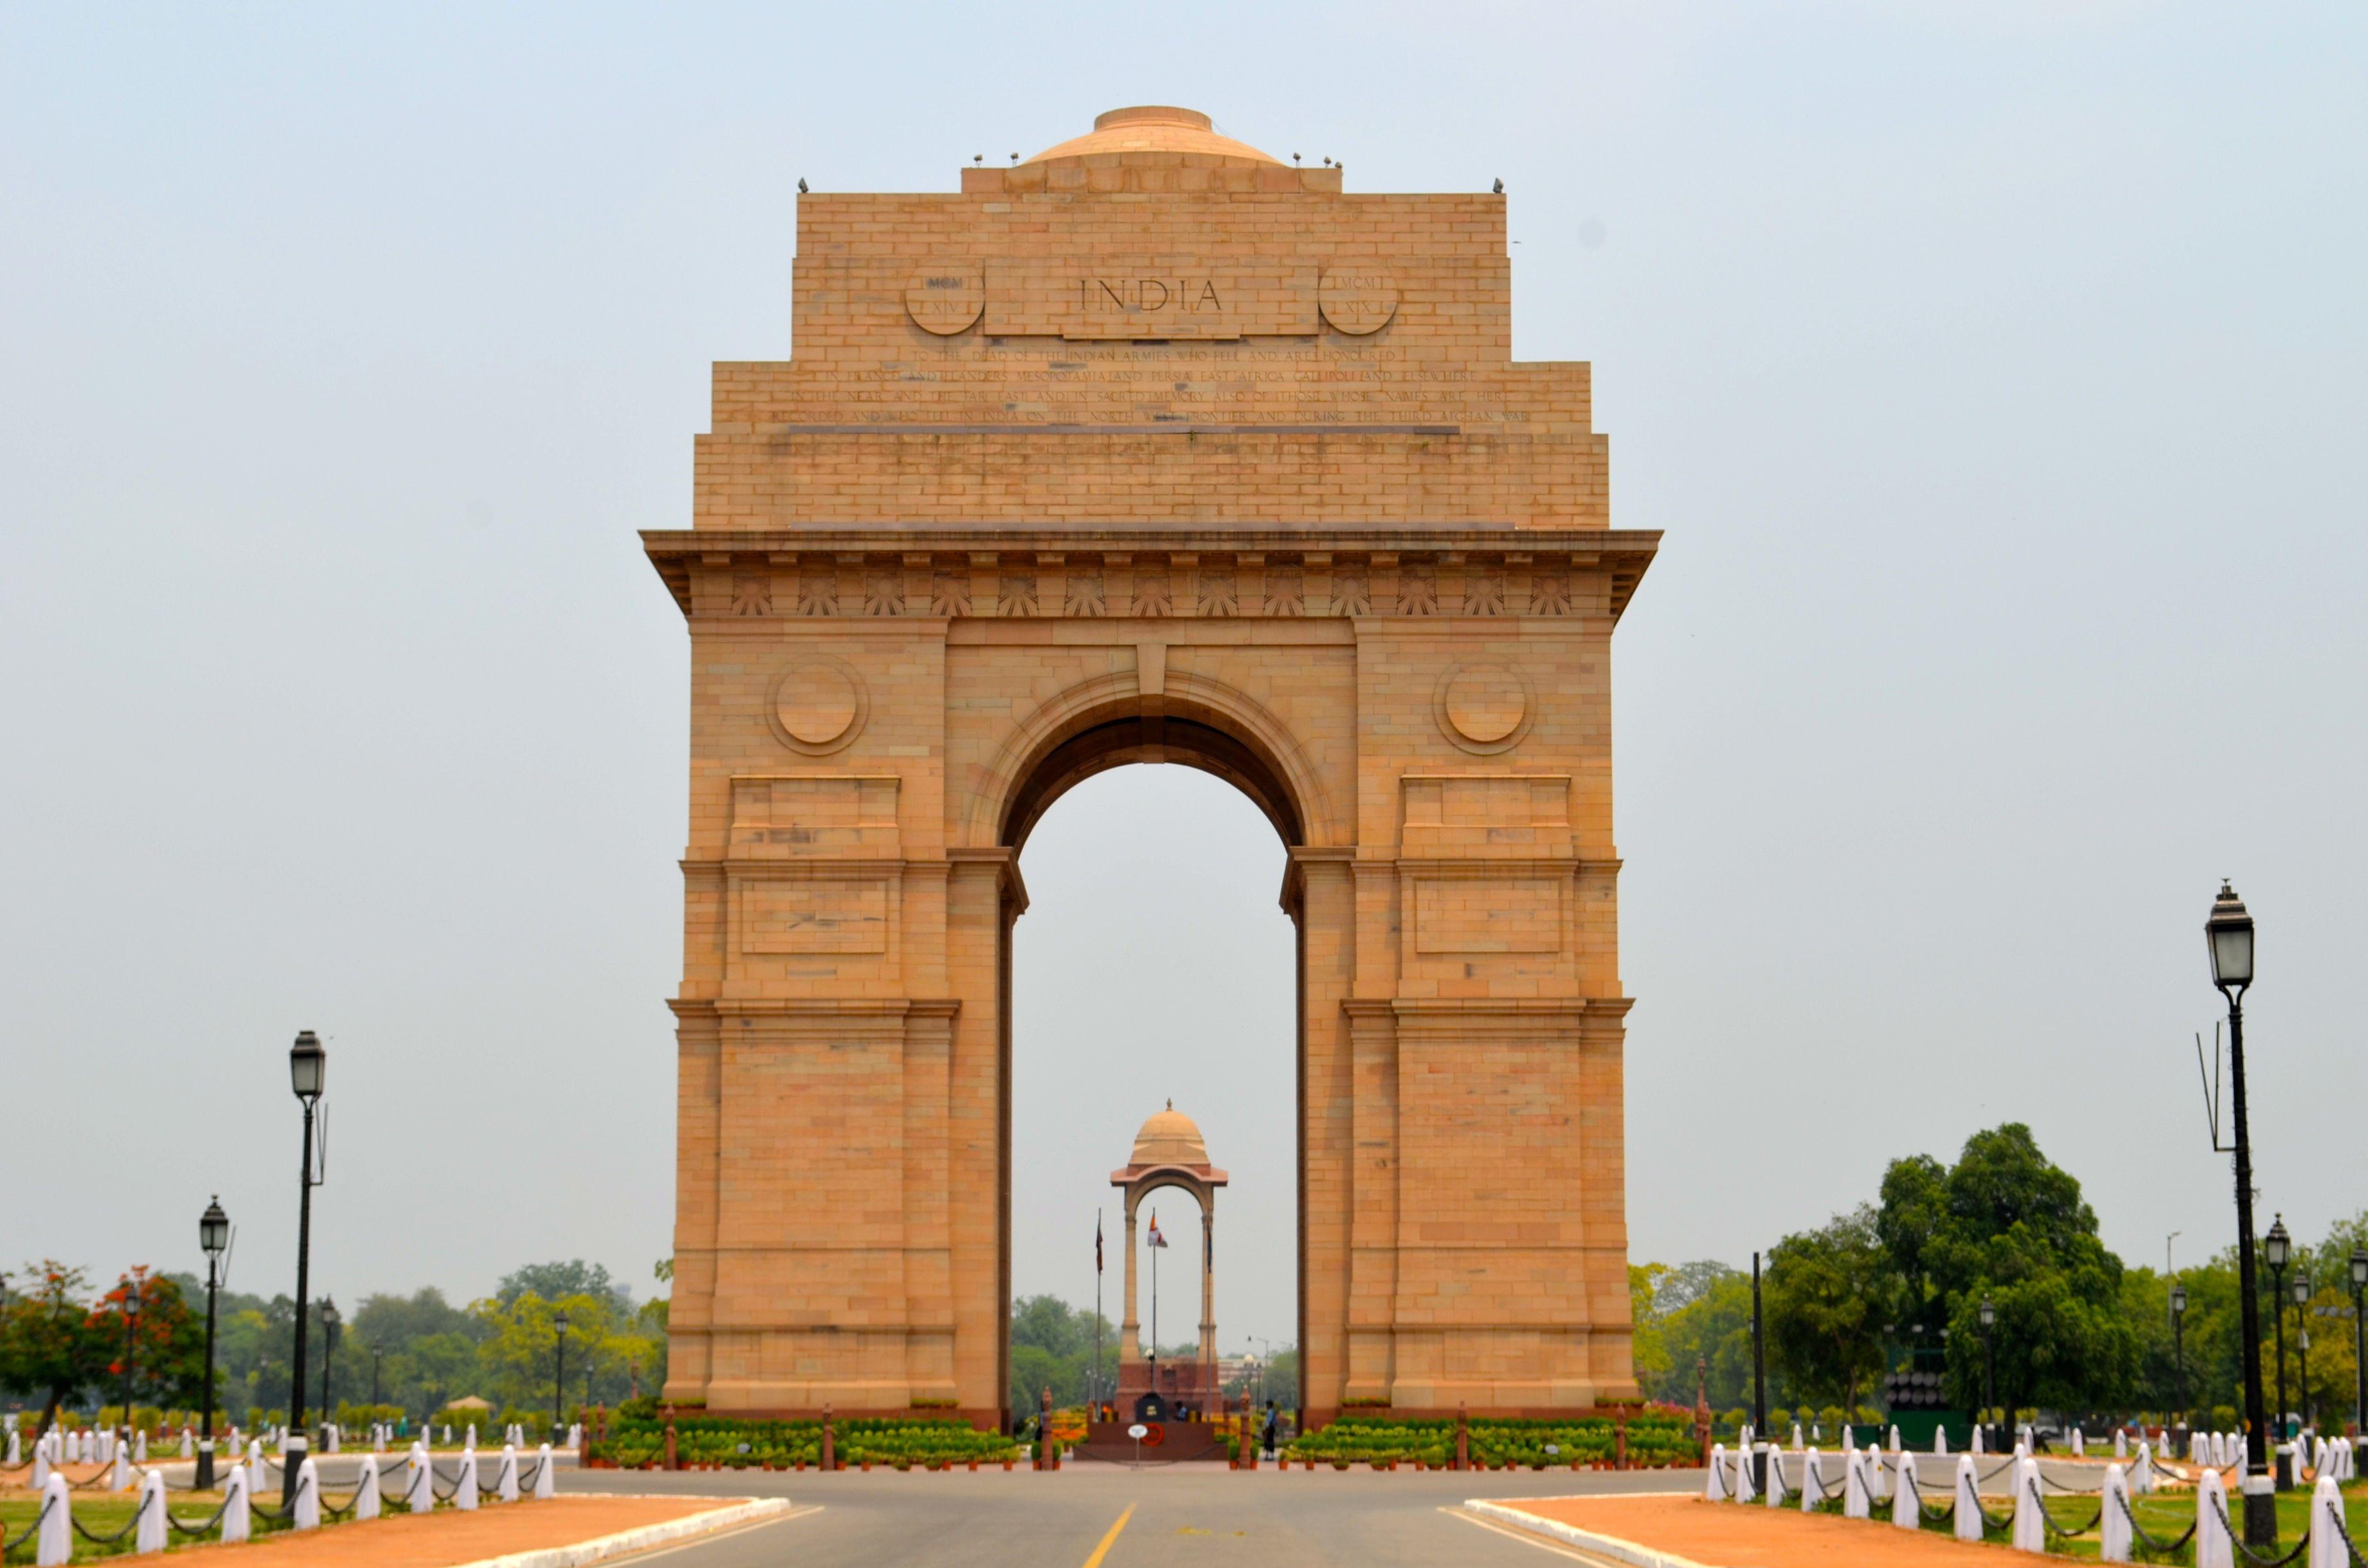 India Gate Tourist Place in Delhi Photo  HD Wallpapers